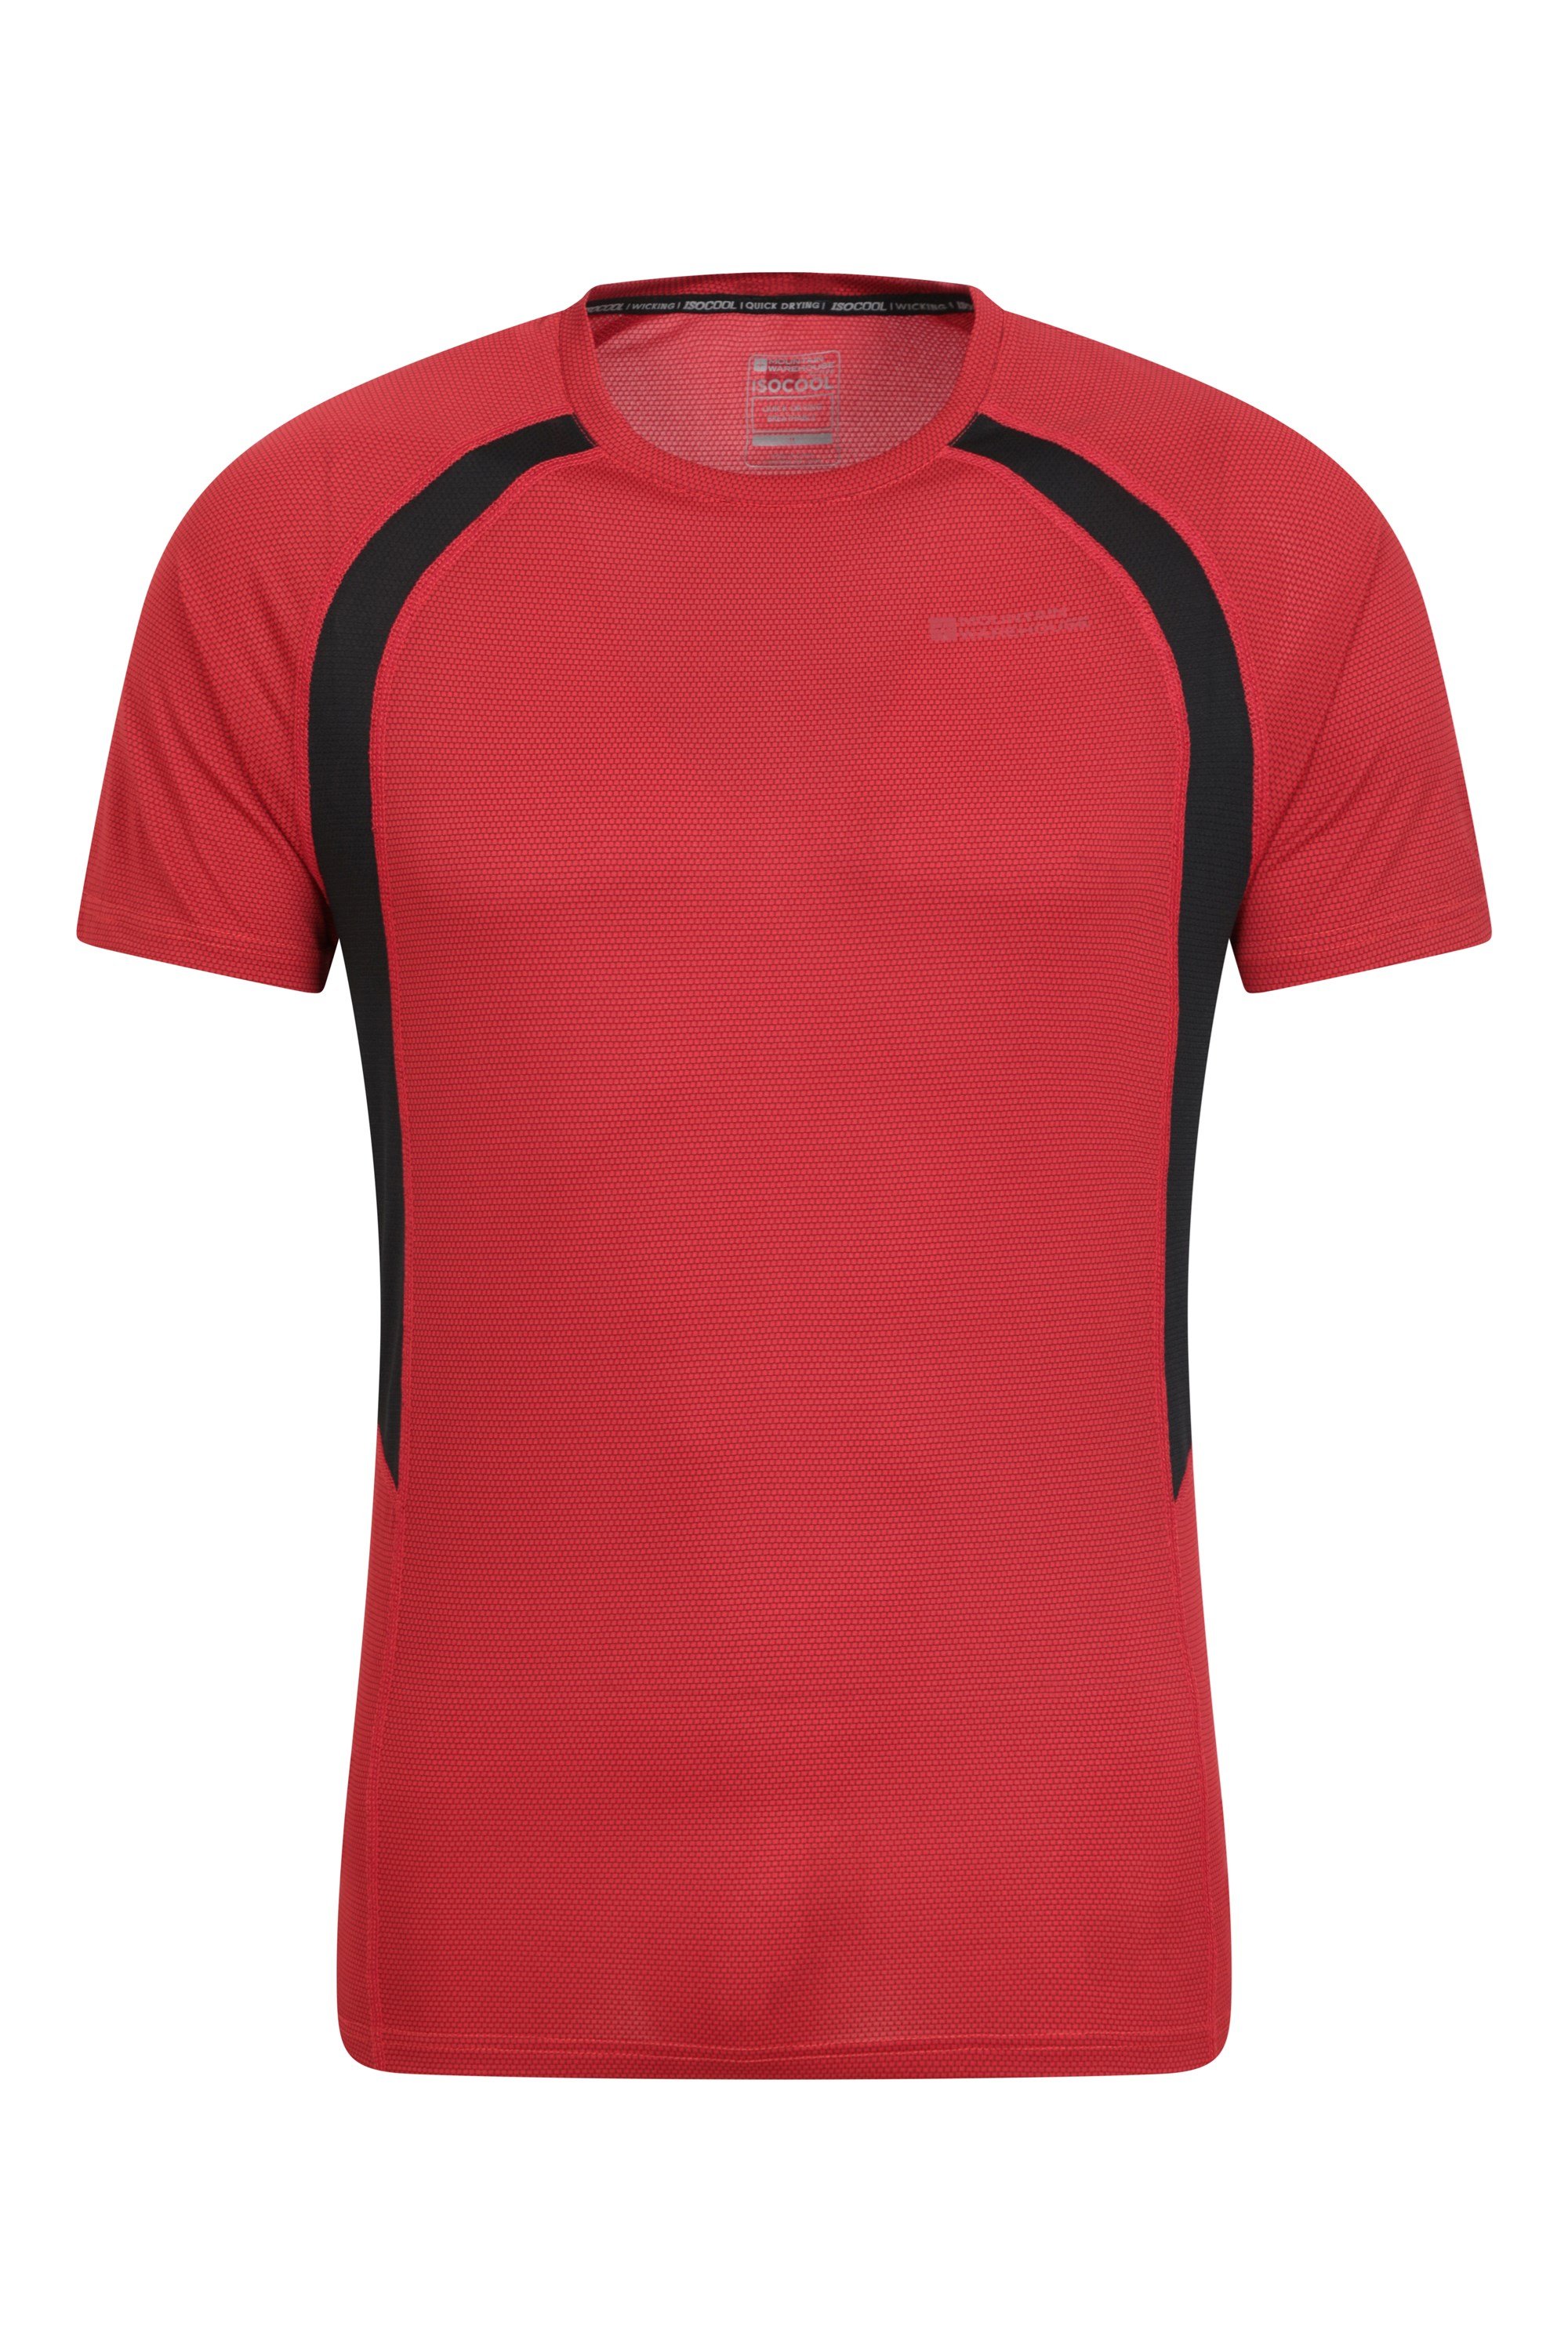 Bryers IsoCool Mens T-Shirt - Red